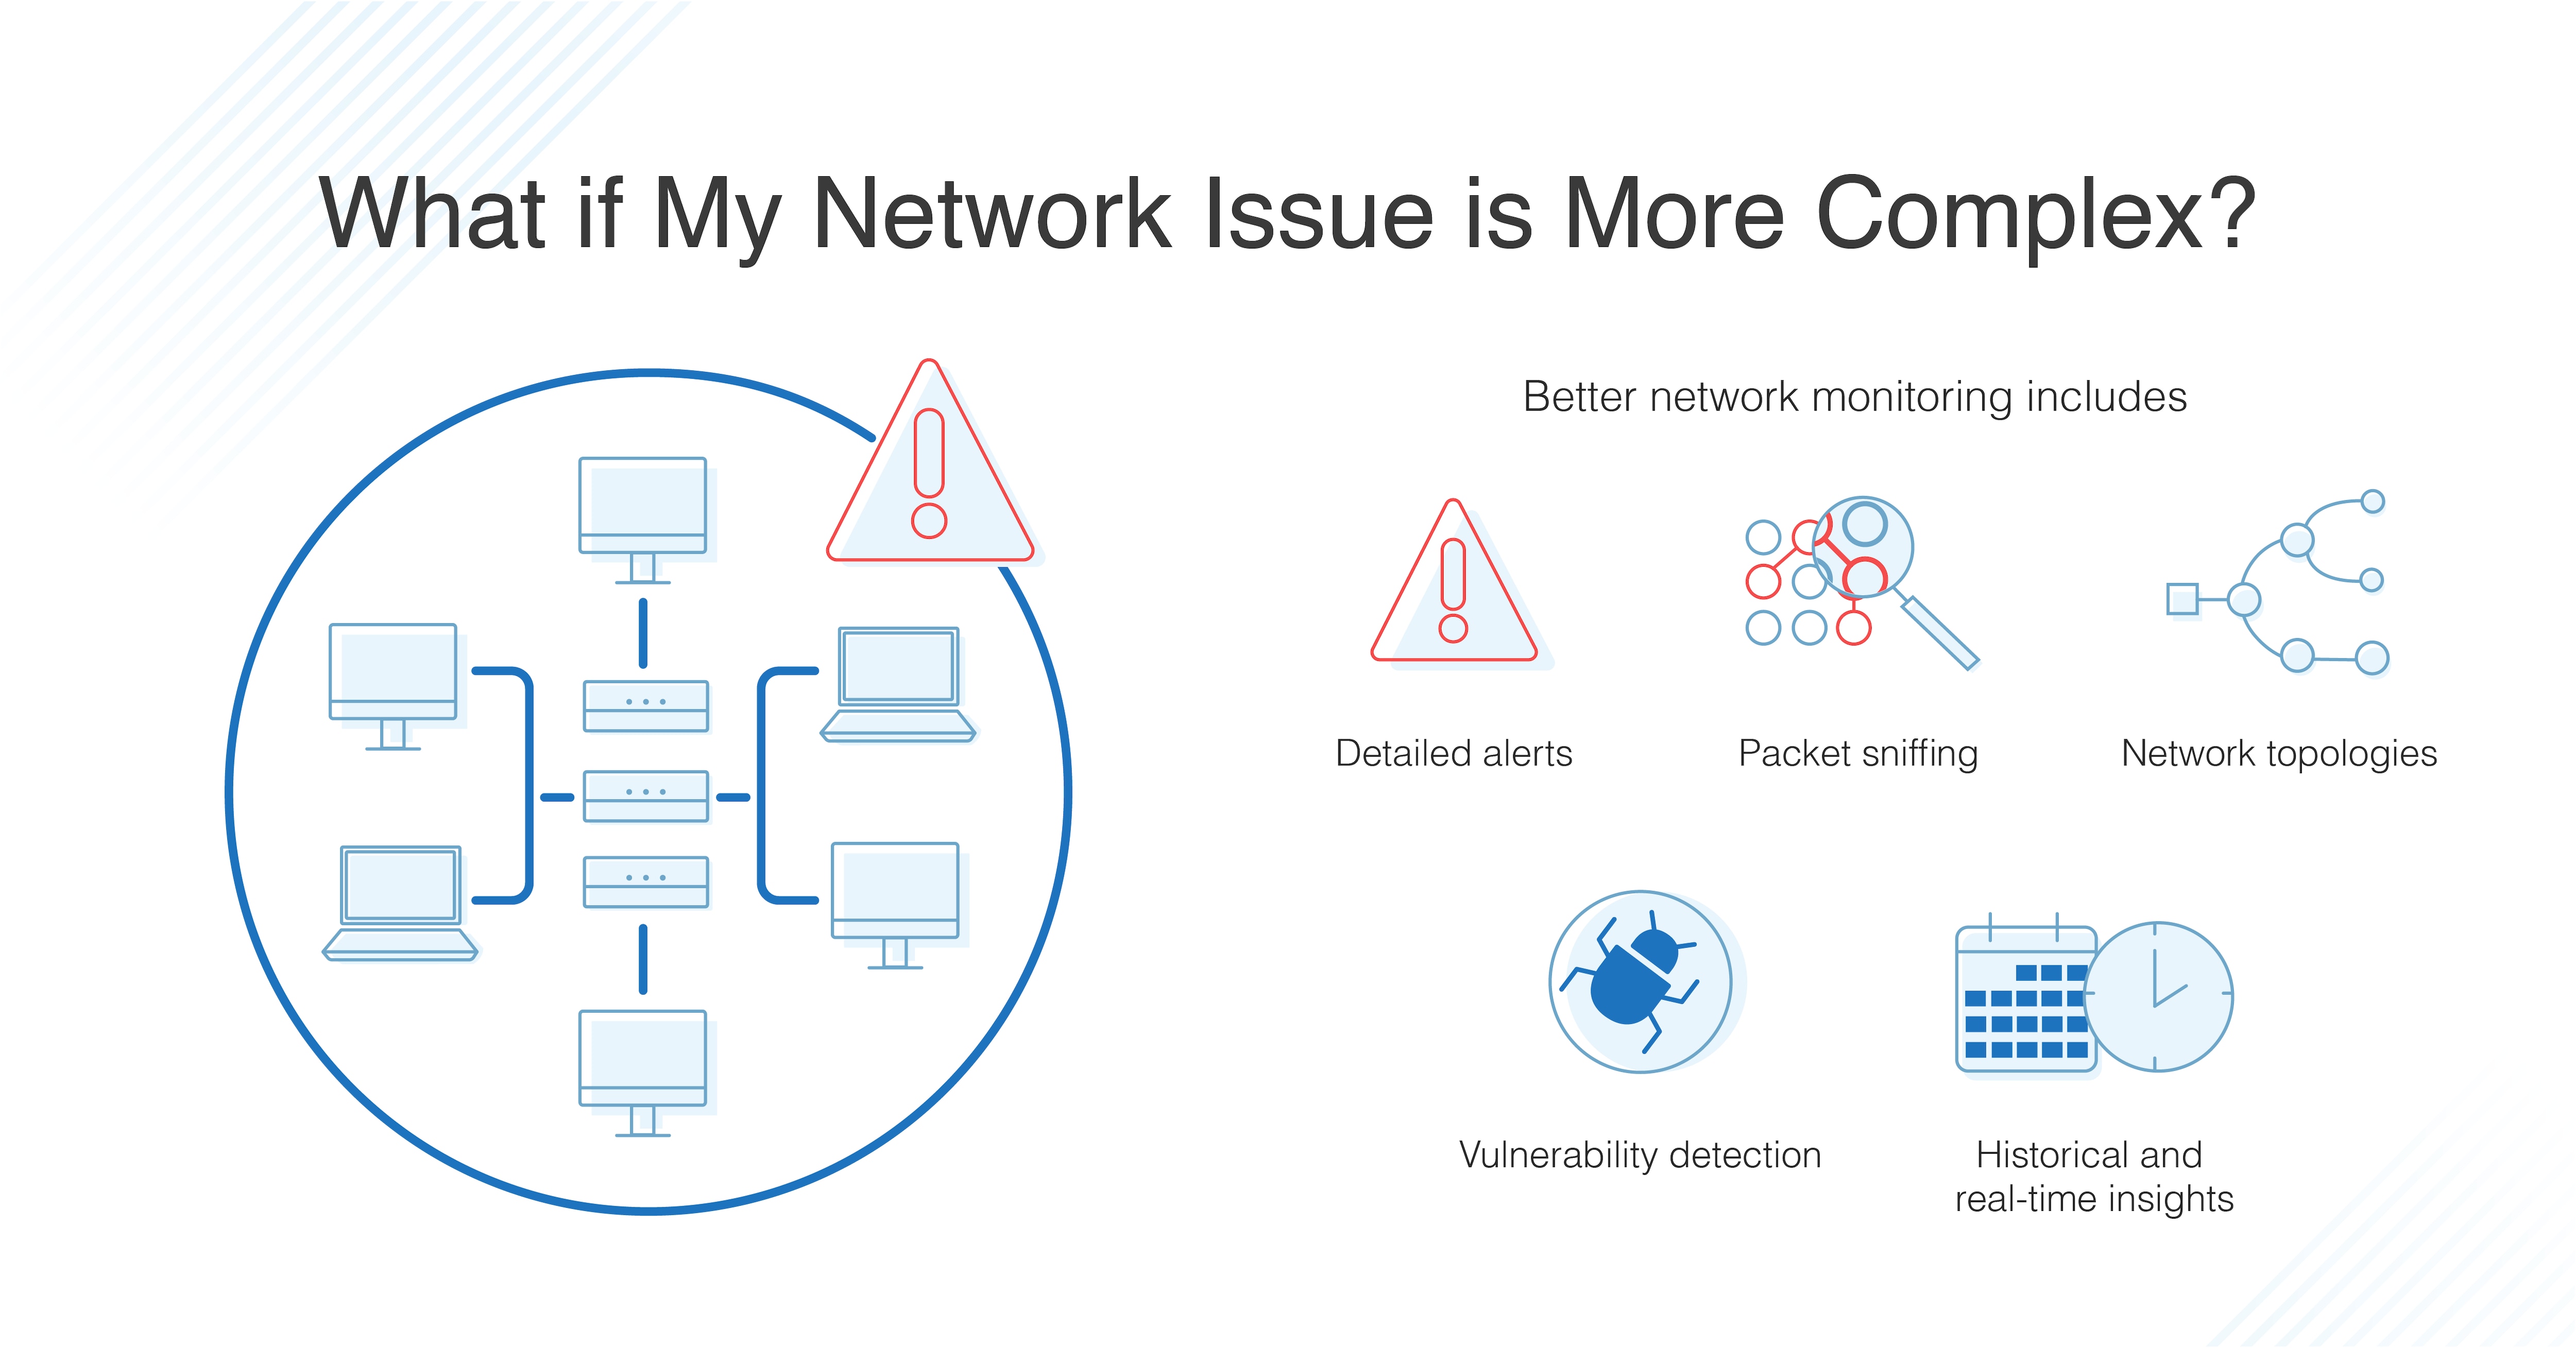 Network connectivity issues
Server maintenance or updates